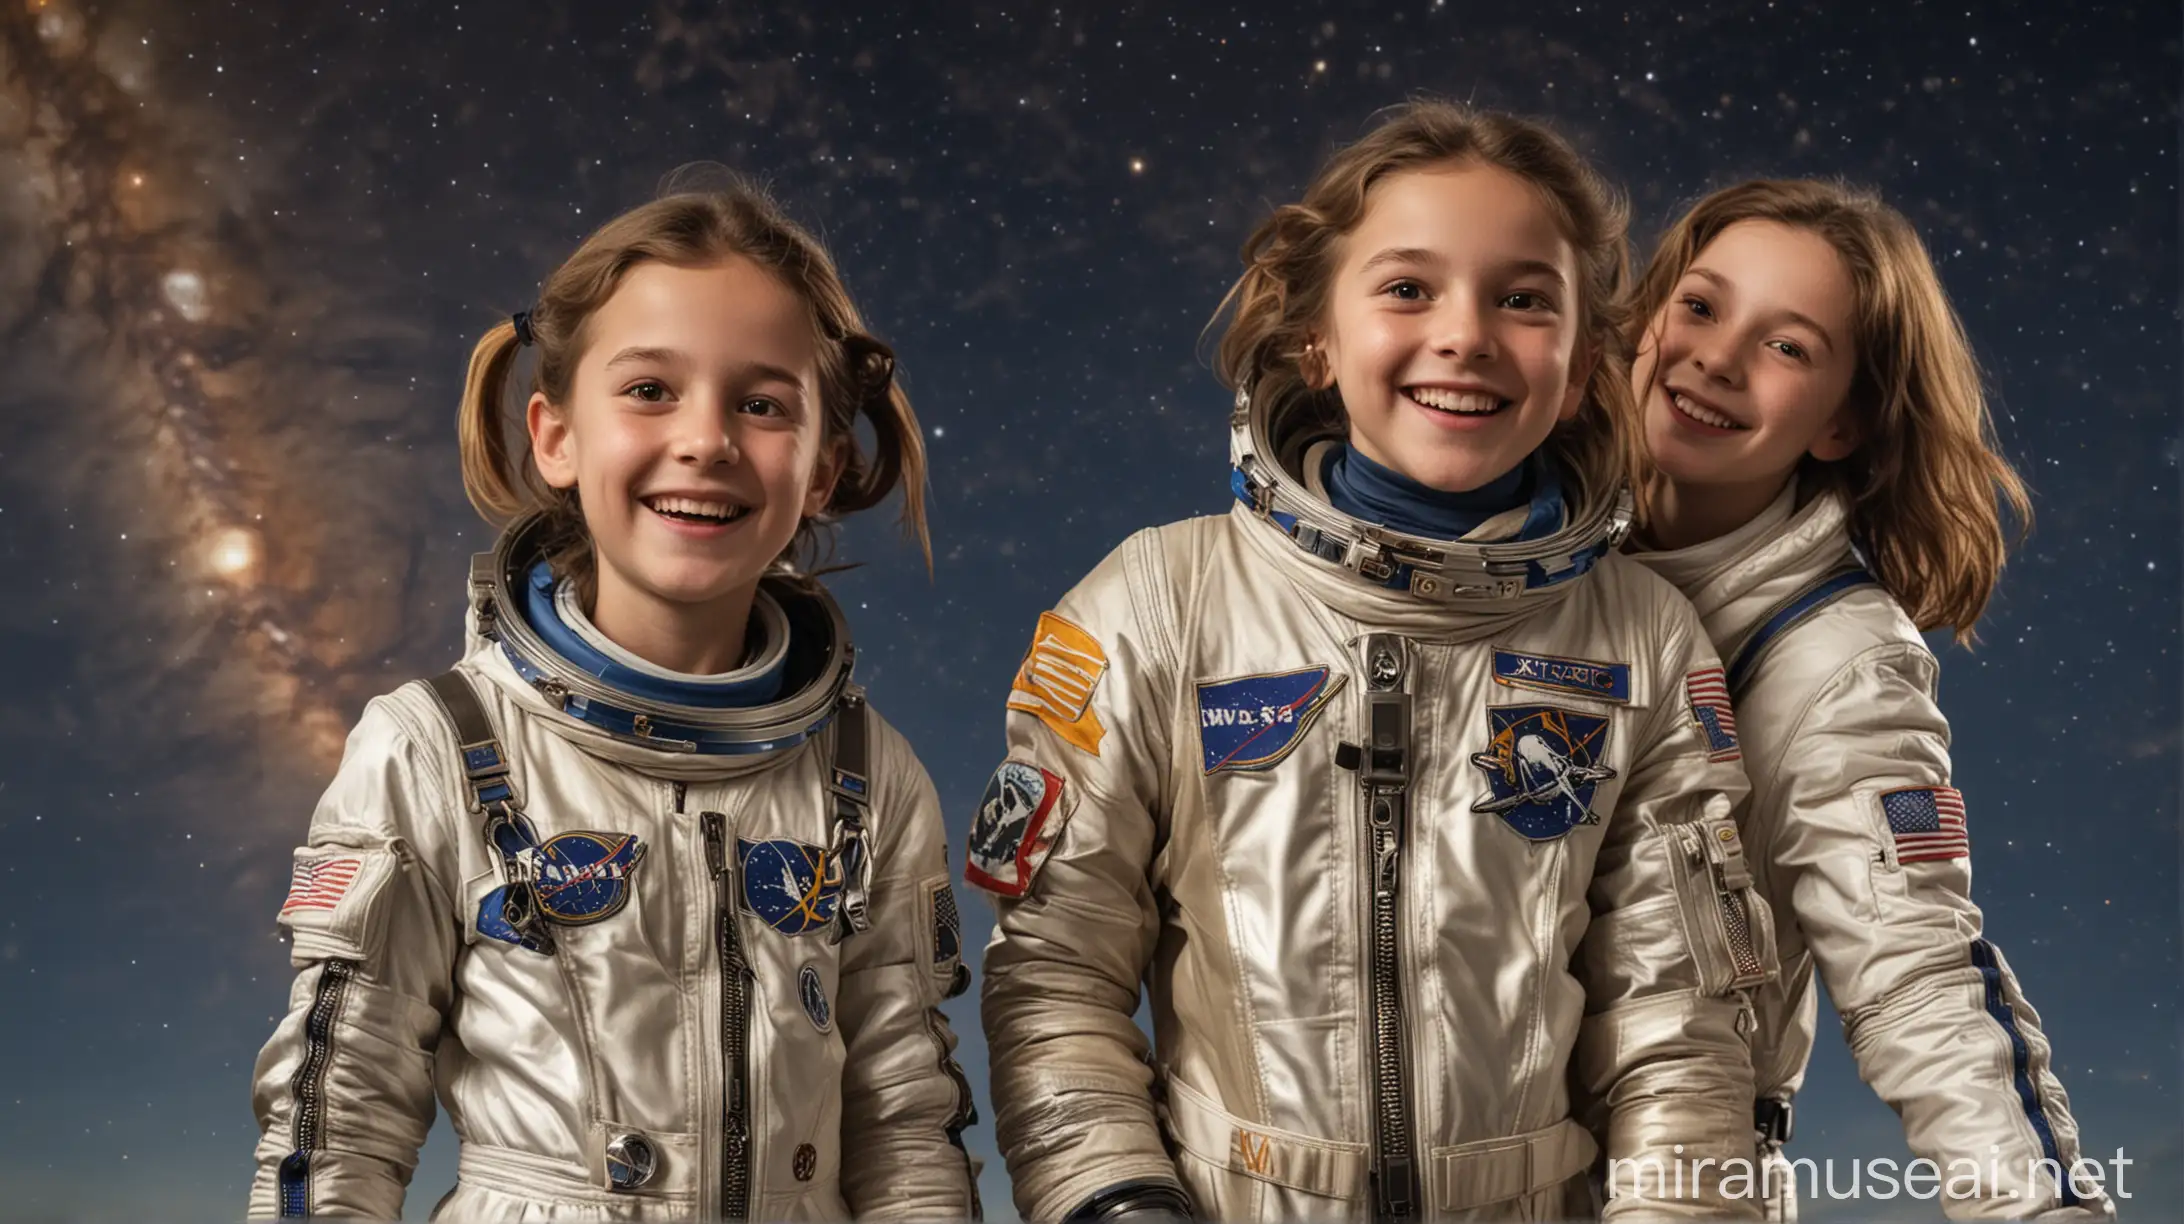 One 10-year-old girl and 10-year-old boy in space, wearing space-suit, excited and interested, rocket beside them, jupiter and saturn seen behind them, they are with a 20-year-old girl, also wearing space-suit, smiling.